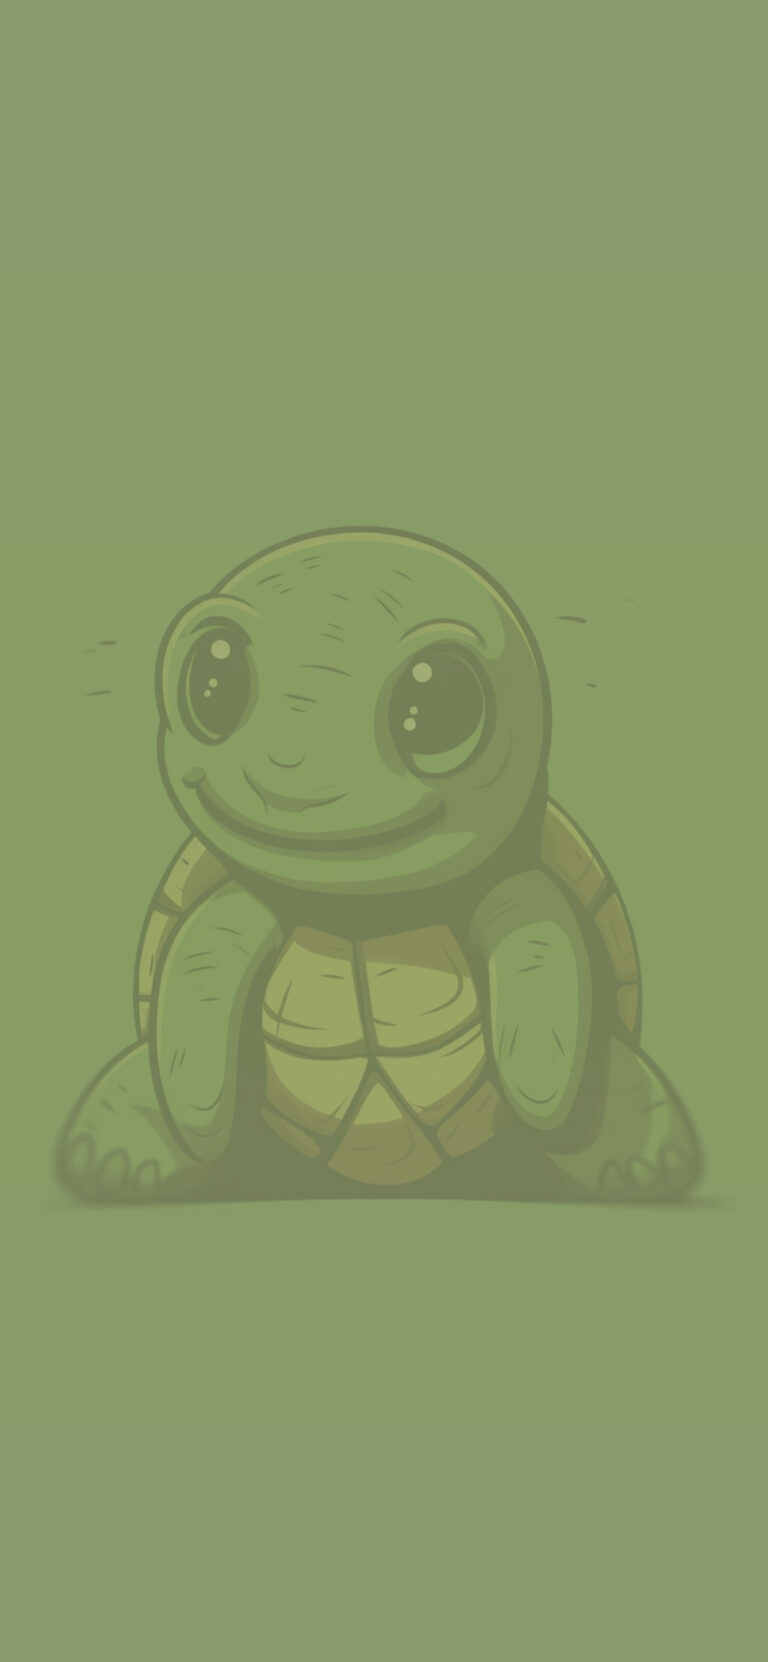 Cute Baby Turtle Green Wallpapers - Baby Turtle Wallpaper iPhone